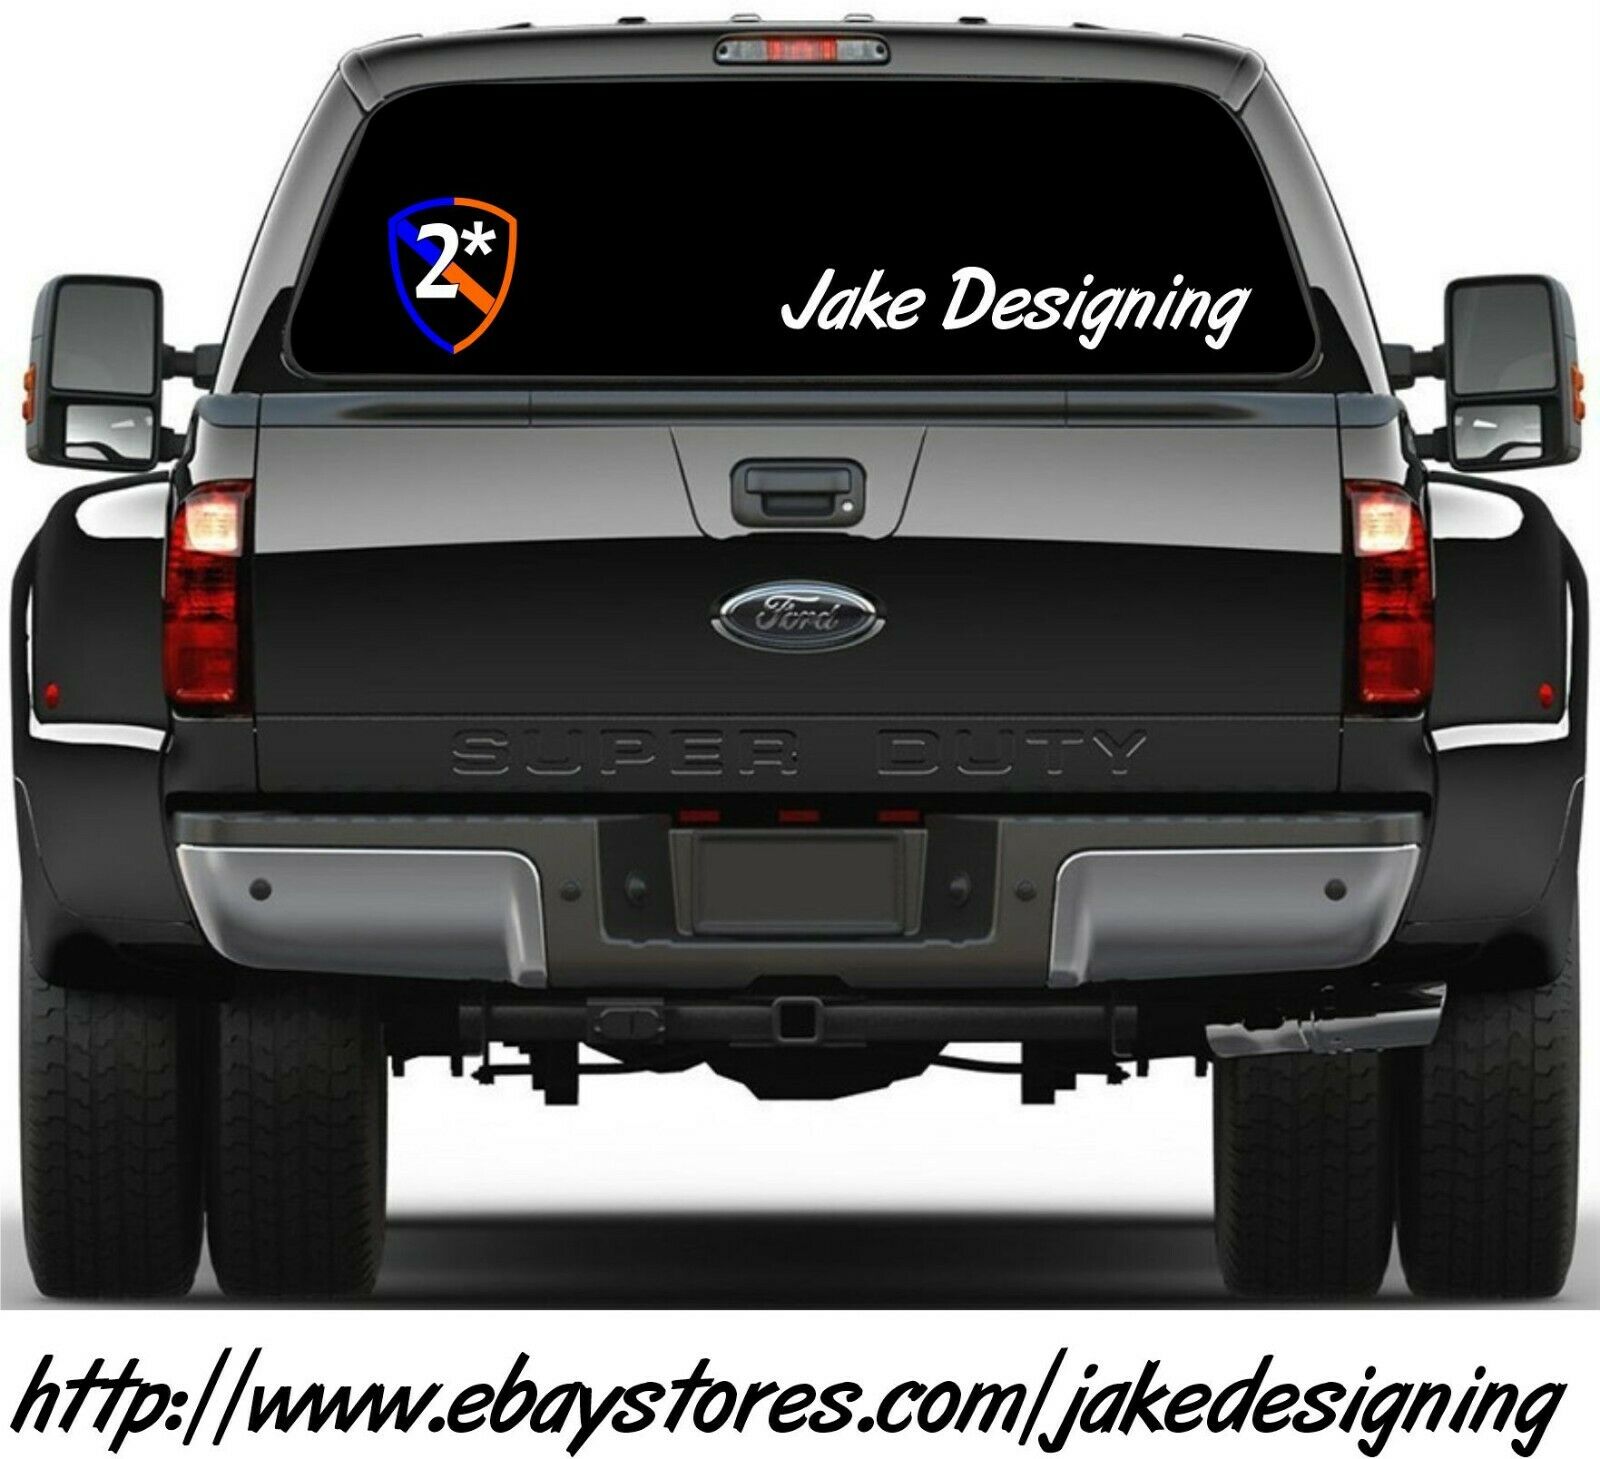 Thin Blue Line Orange Line 2 Ass to Risk (2*) window decal - Various Sizes - Powercall Sirens LLC